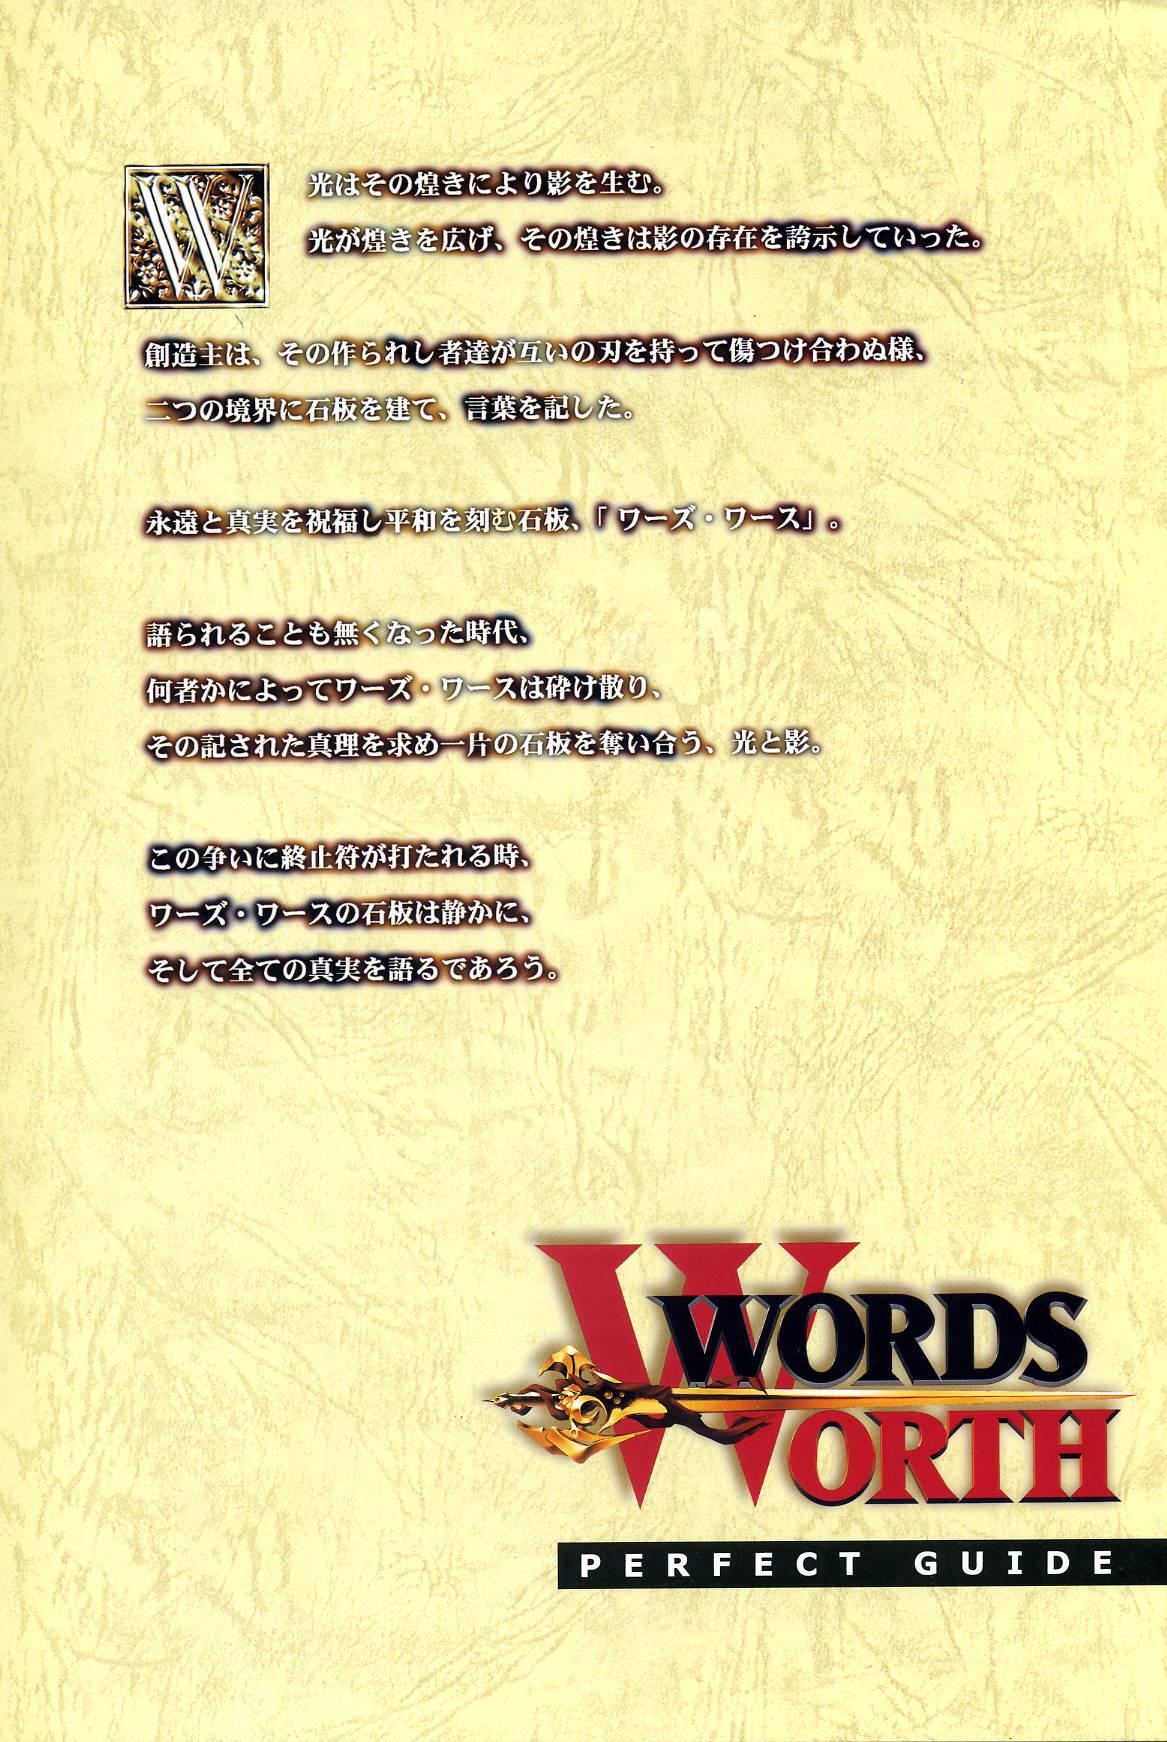 Titfuck WORDS WORTH 完全ガイド - Words worth Amateur Porno - Page 2